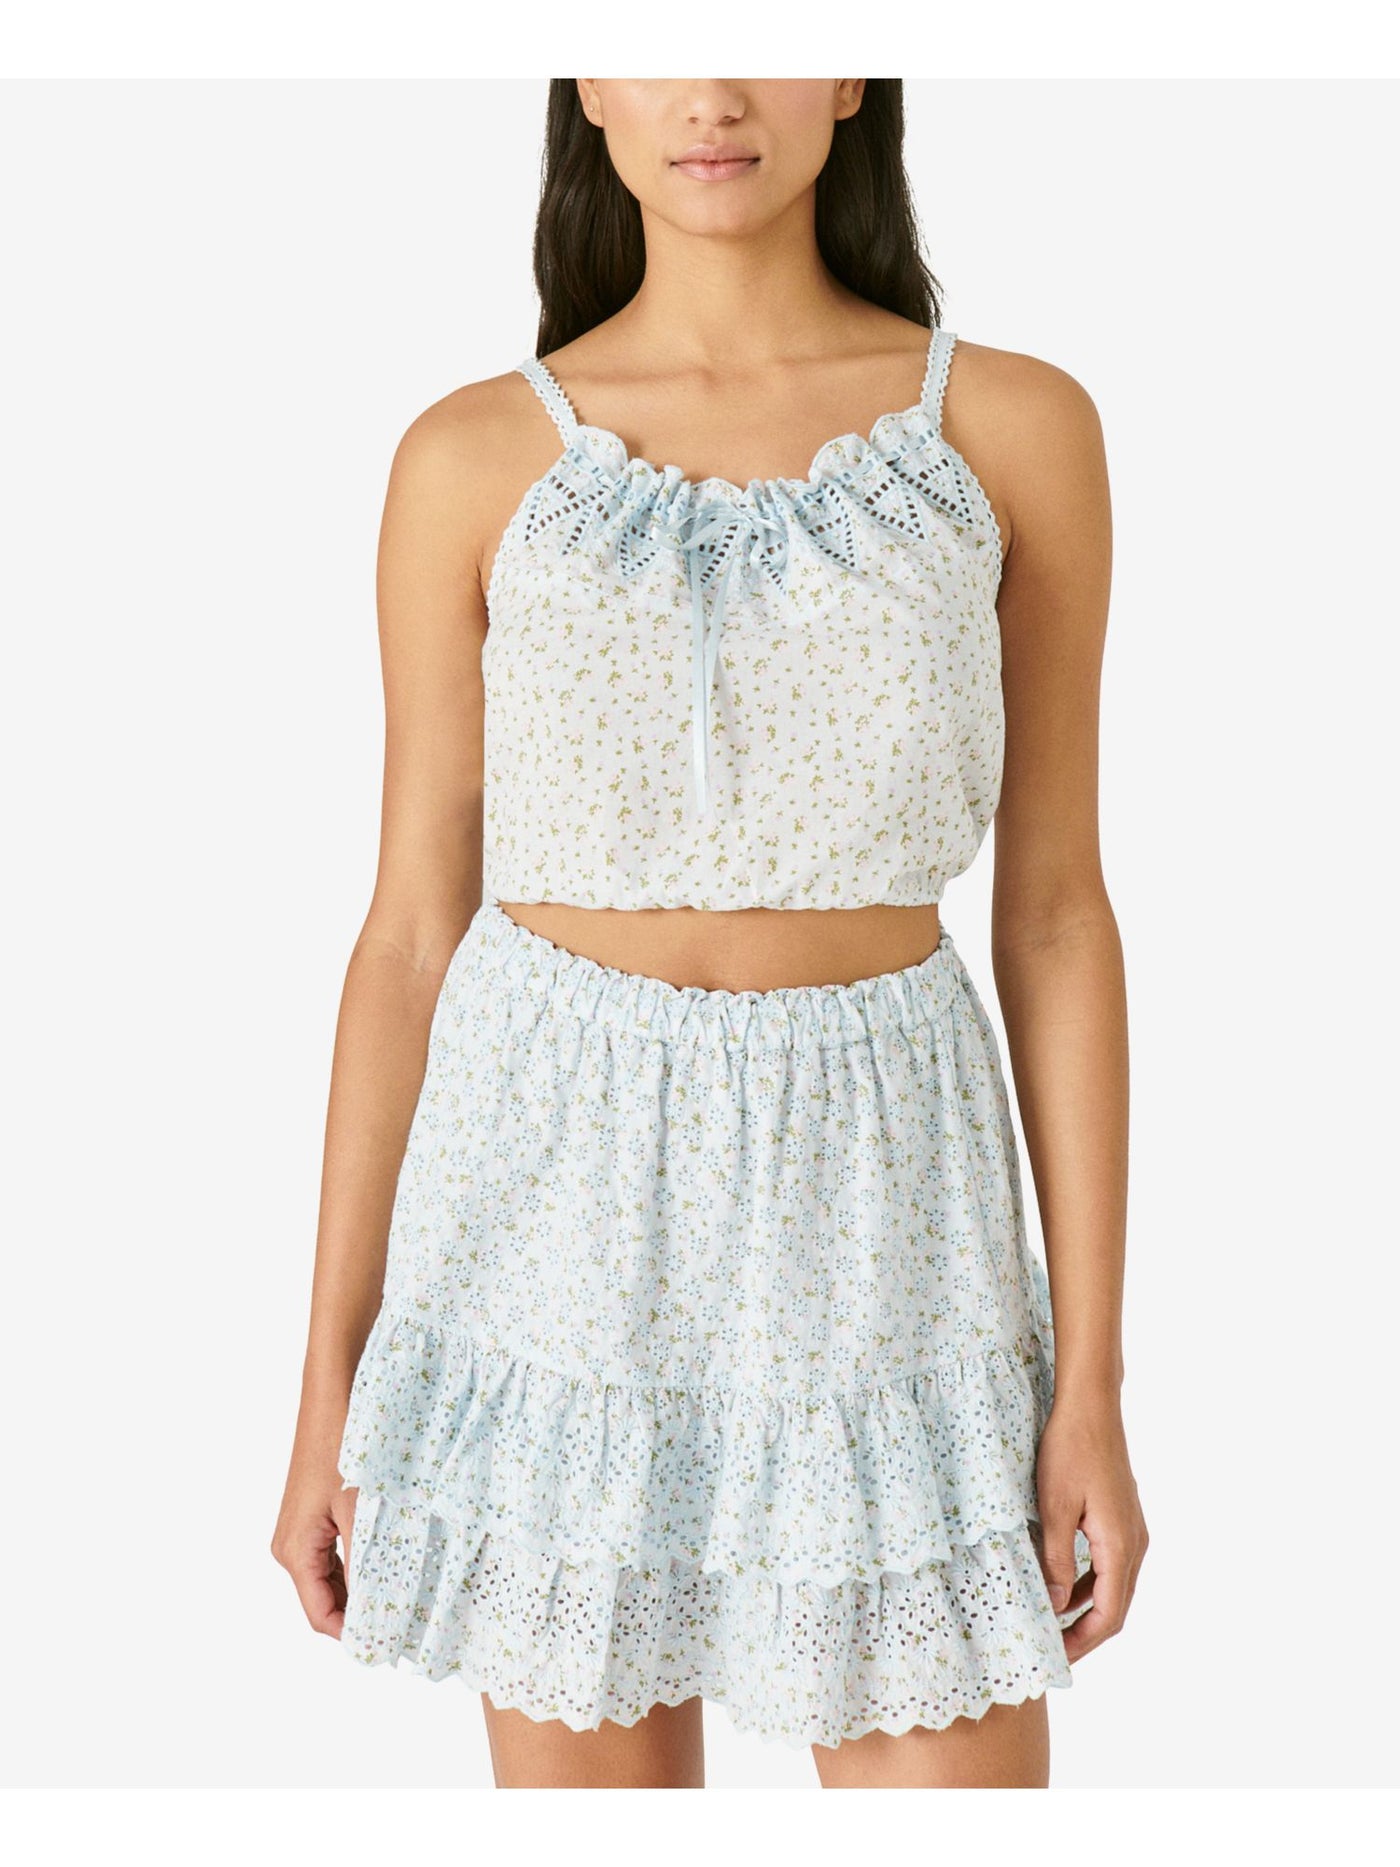 LUCKY BRAND Womens Light Blue Embroidered Cropped Drawstring Elastic Hem Floral Sleeveless Scoop Neck Cami Top L